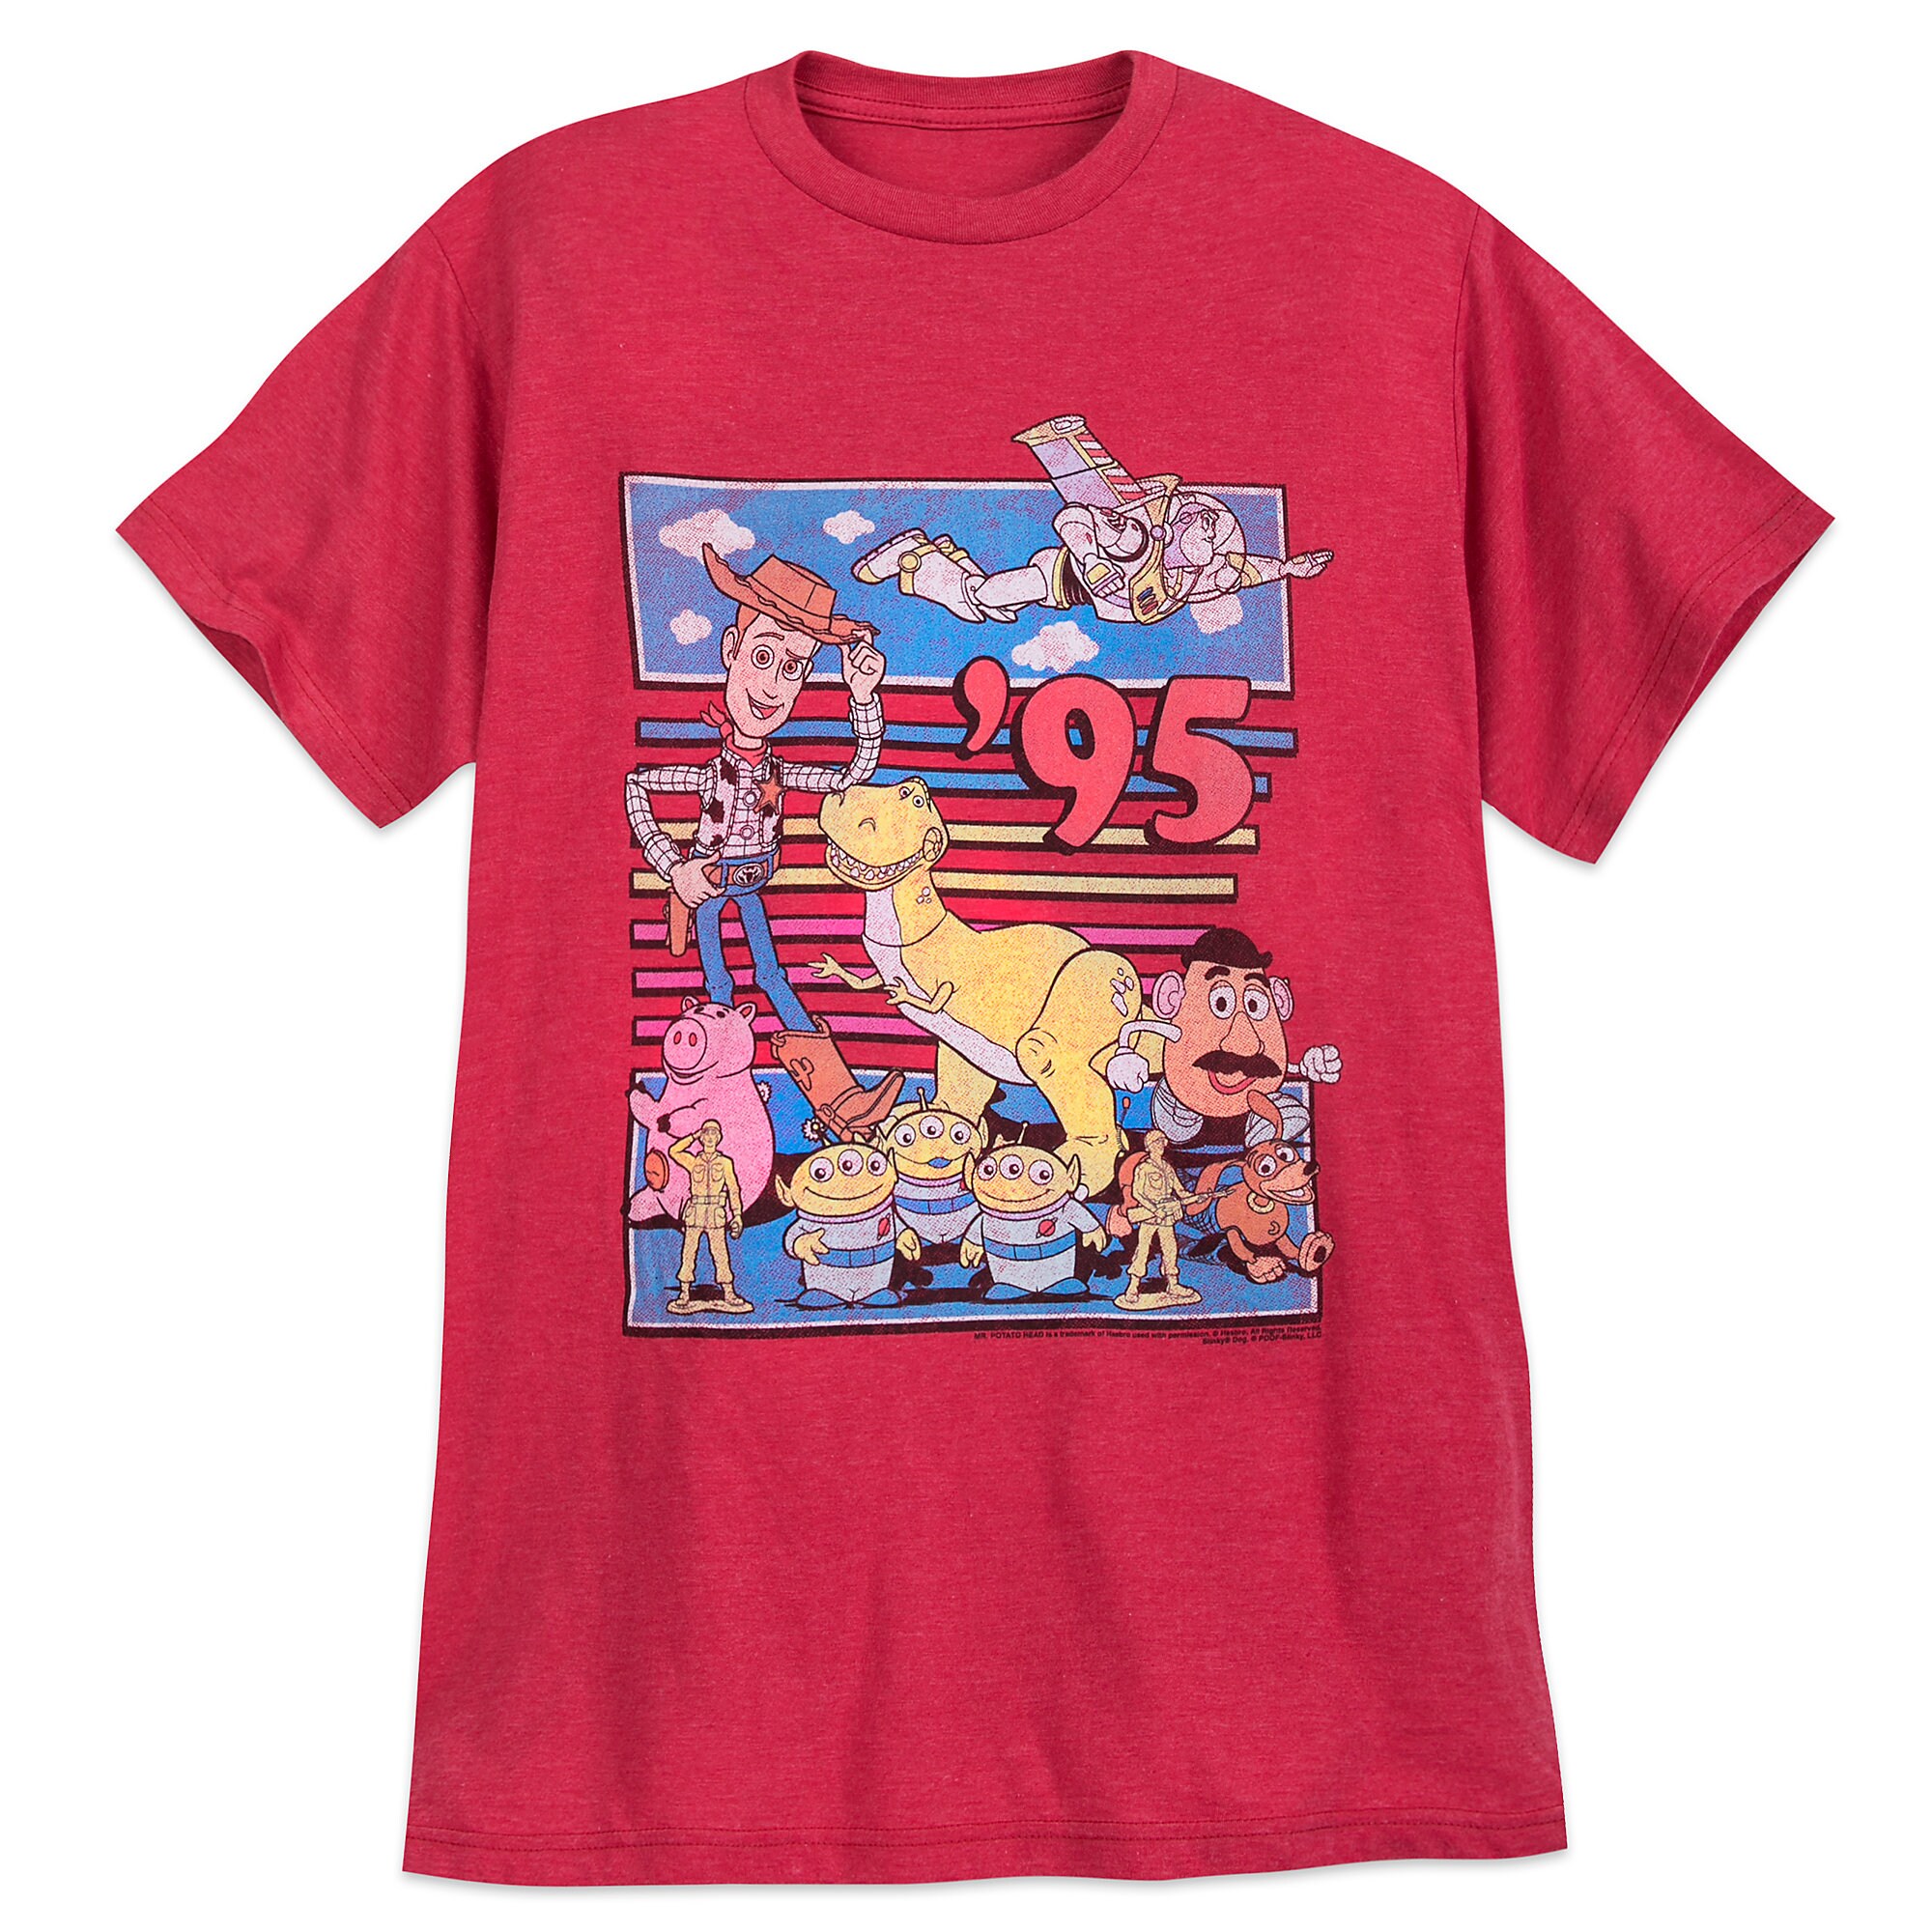 Toy Story '95 T-Shirt for Adults